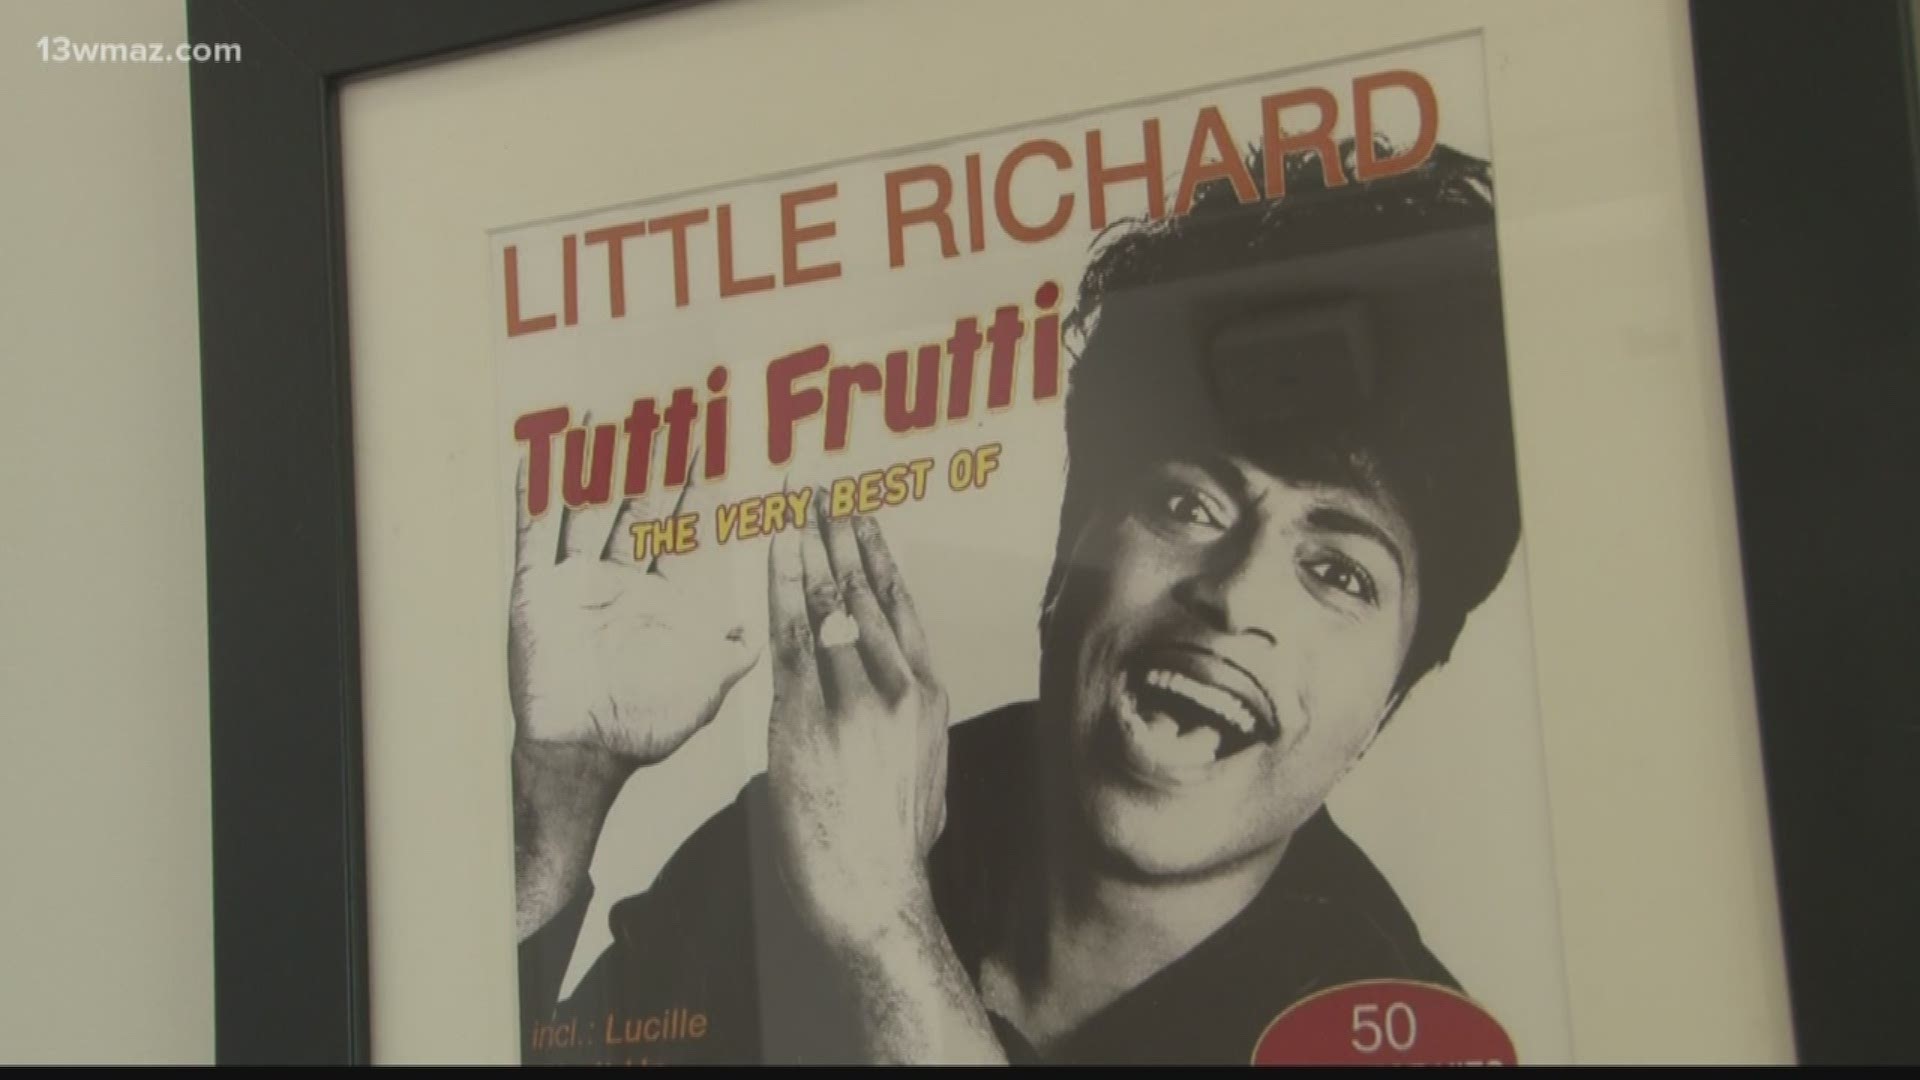 The architect of rock and roll, Little Richard, turns 87 today.